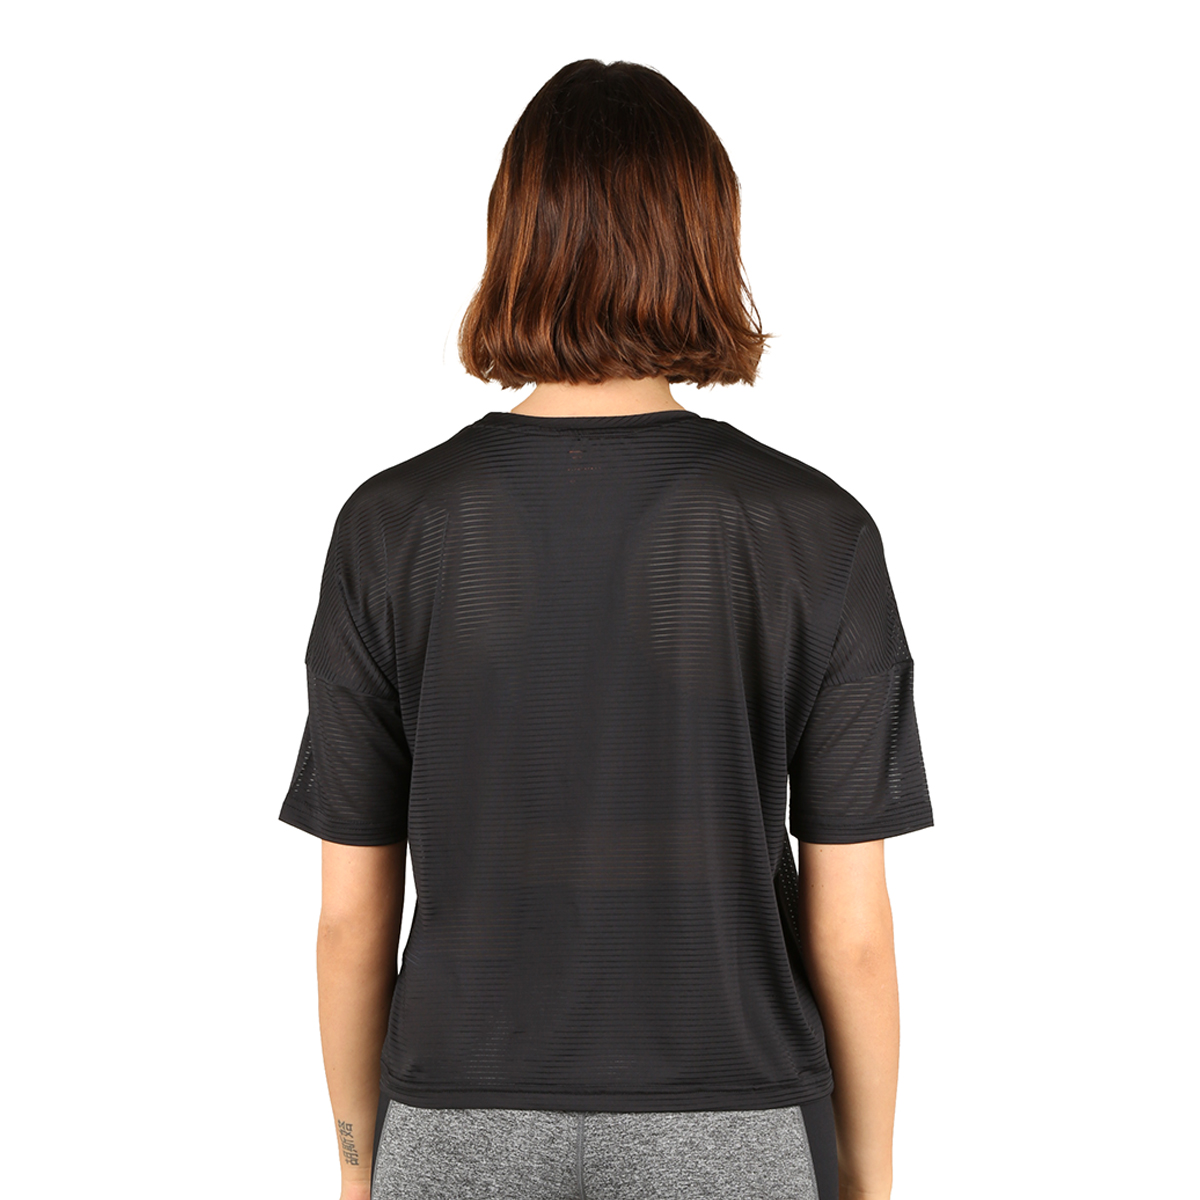 Remera Topper Mc Training Light II,  image number null